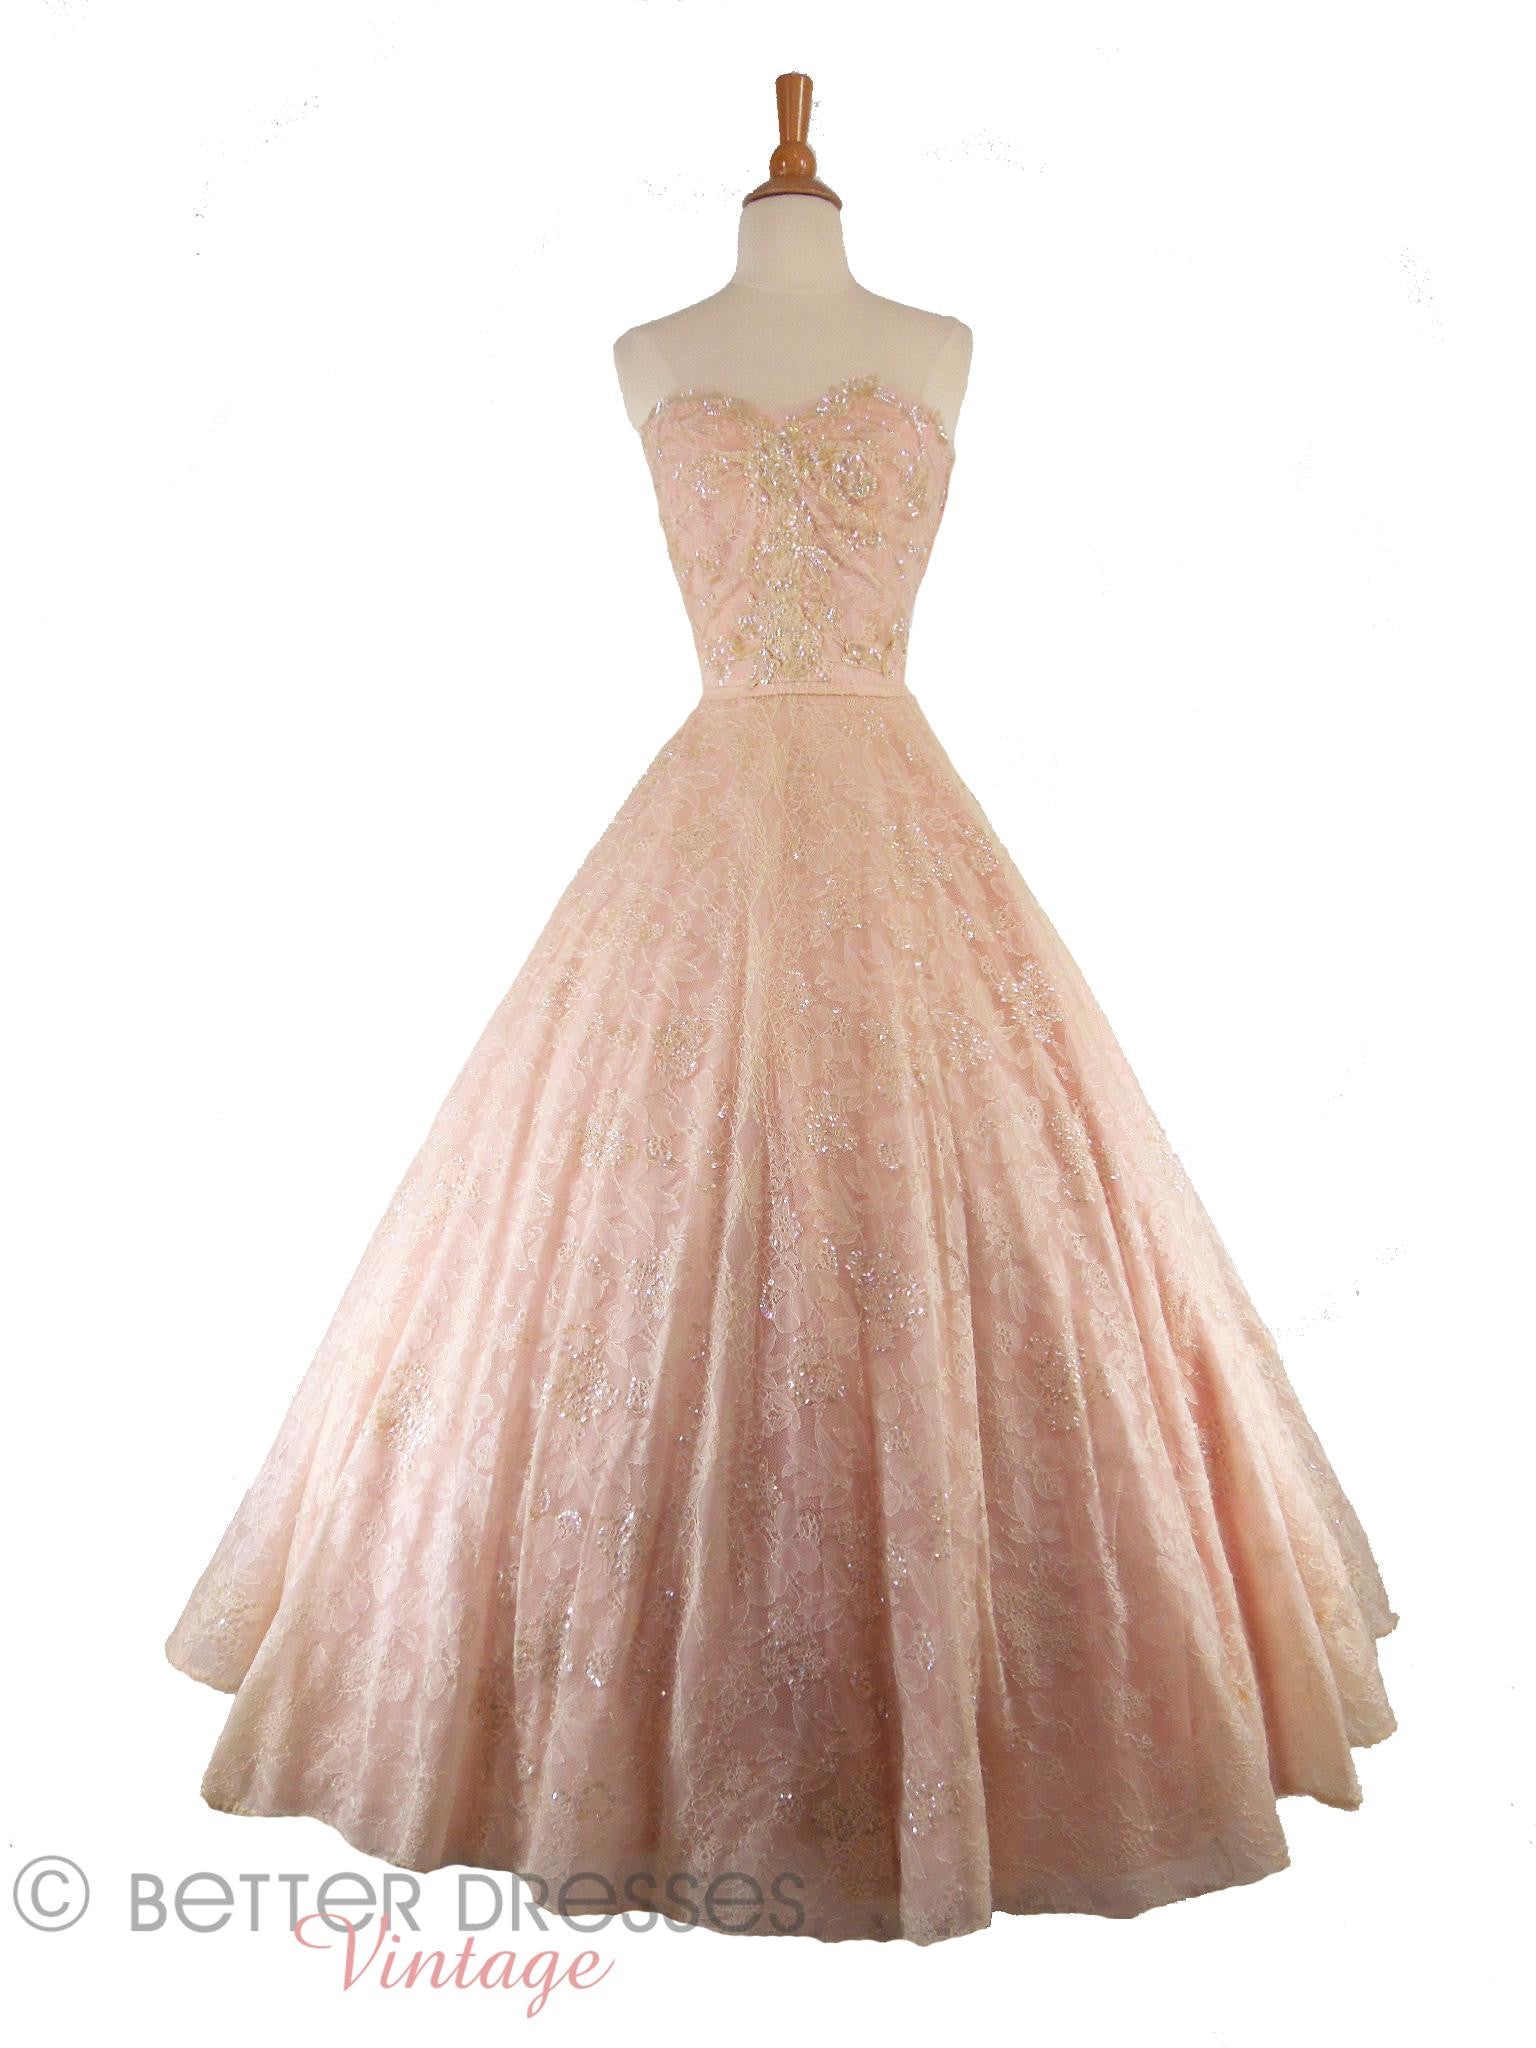 Ballgown, Ann Lowe (1950s). White tulle with appliqued red velvet trim and  oversized bows, fitted cap sleeve bodice and voluminous layered skirt,  interior corset and stiff under-skirt. Whitaker Auctions. : r/fashionhistory